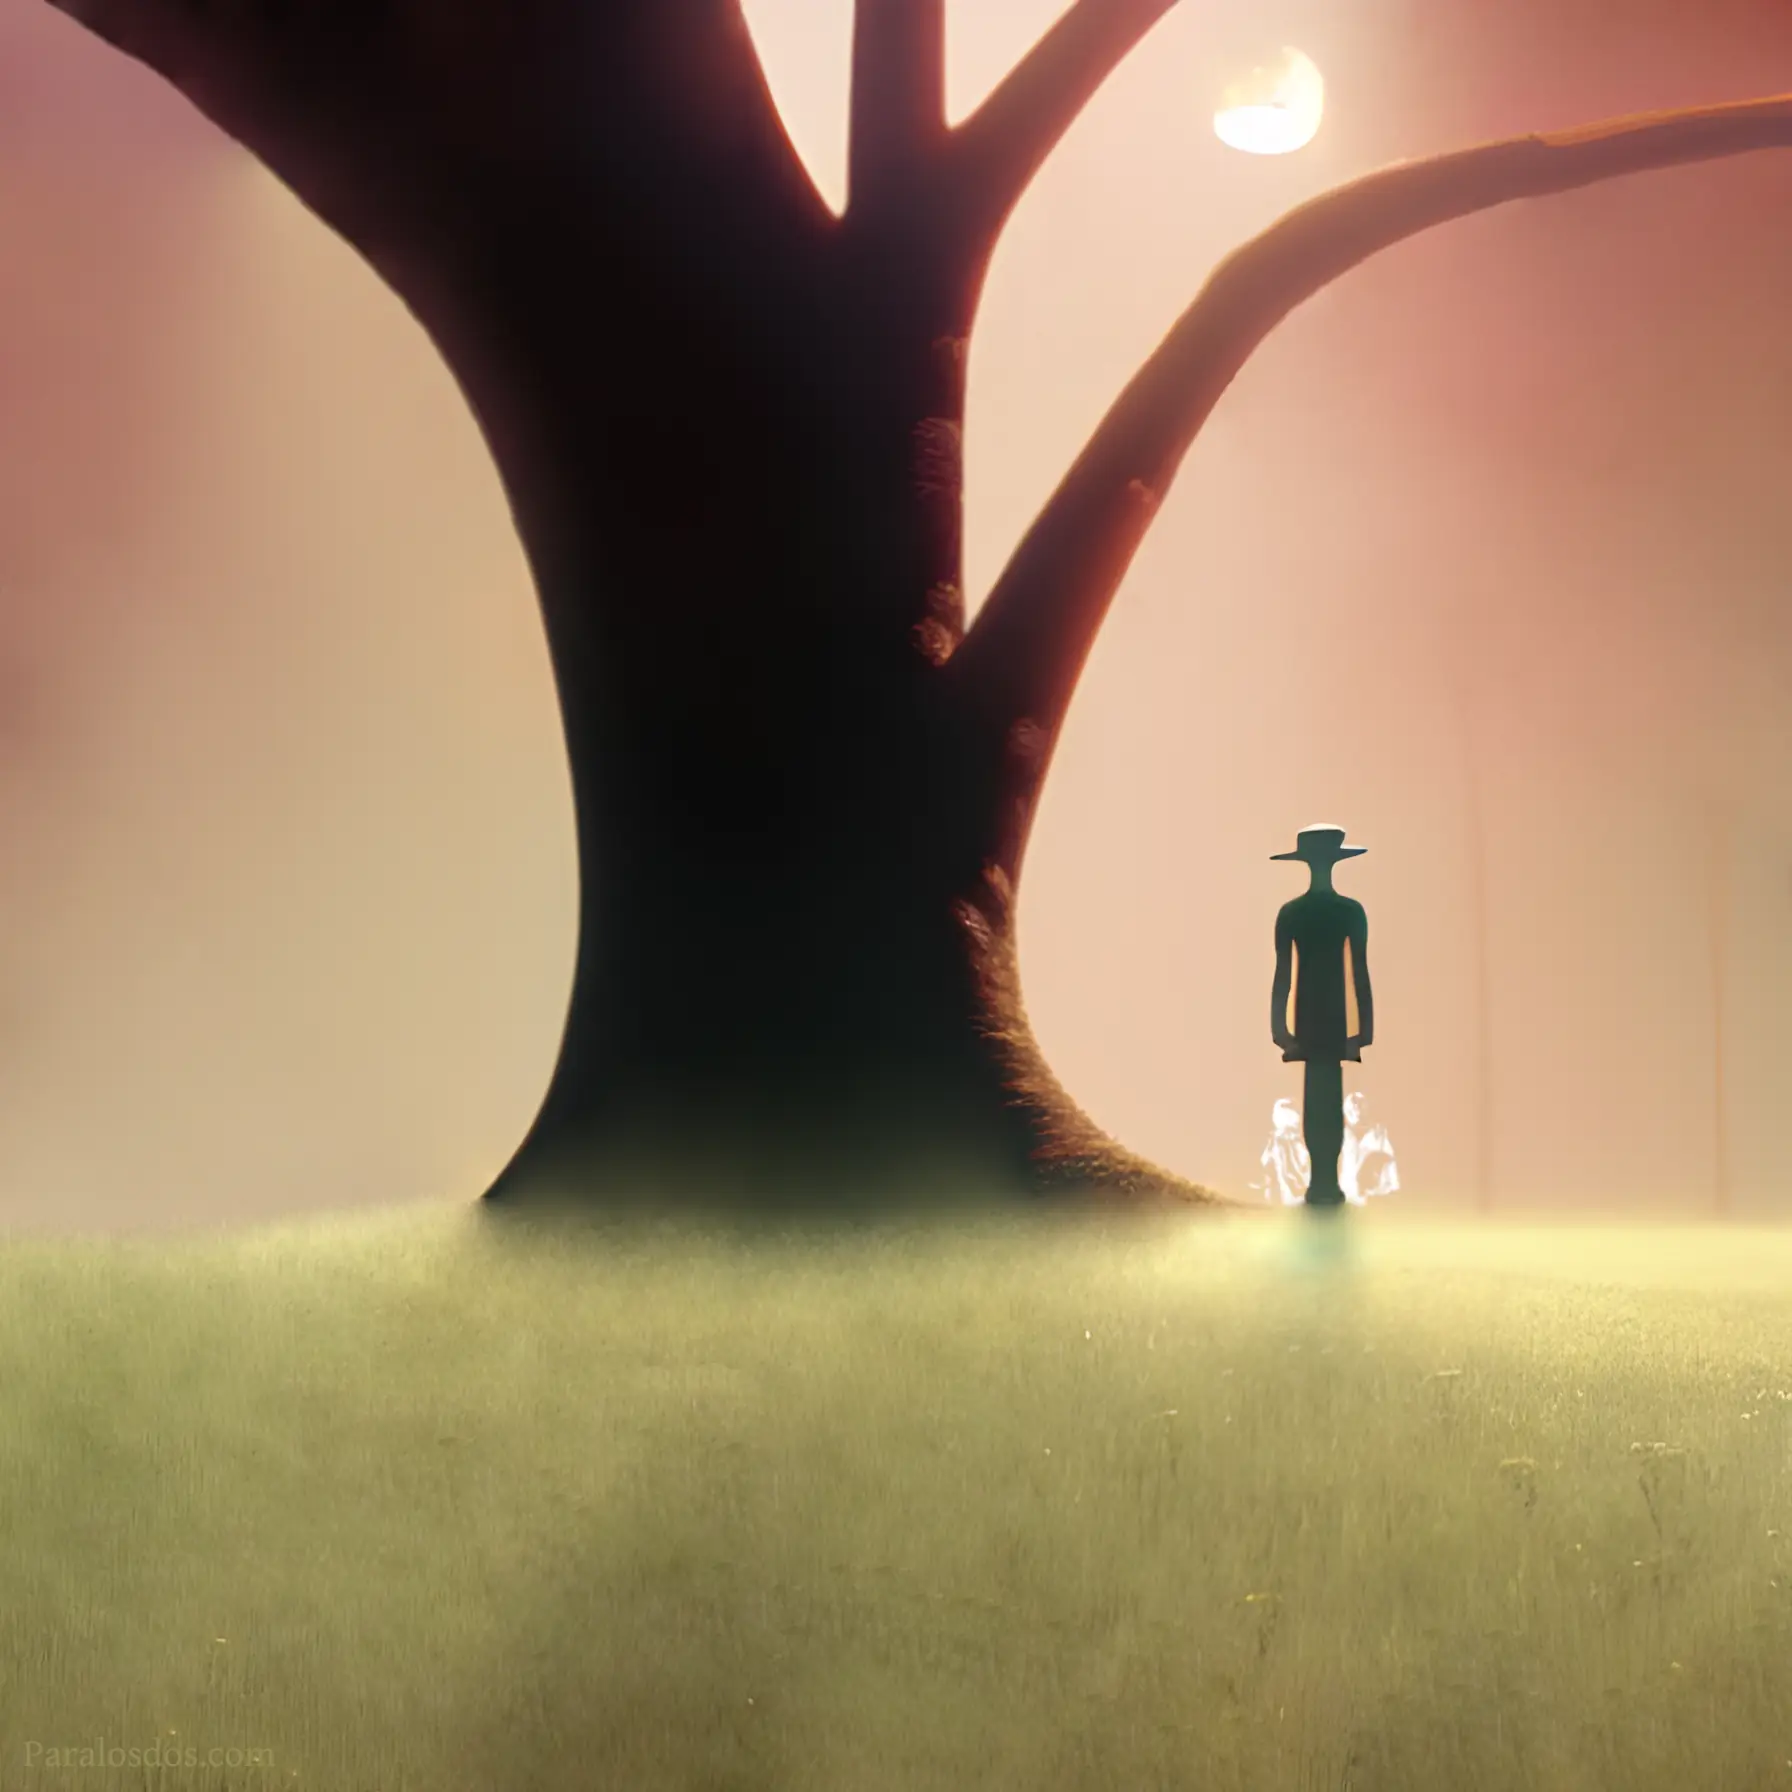 An Artistic rendering of a figure standing tho the right of a big old tree. There is the sense of light growing mysteriously in the foreground.